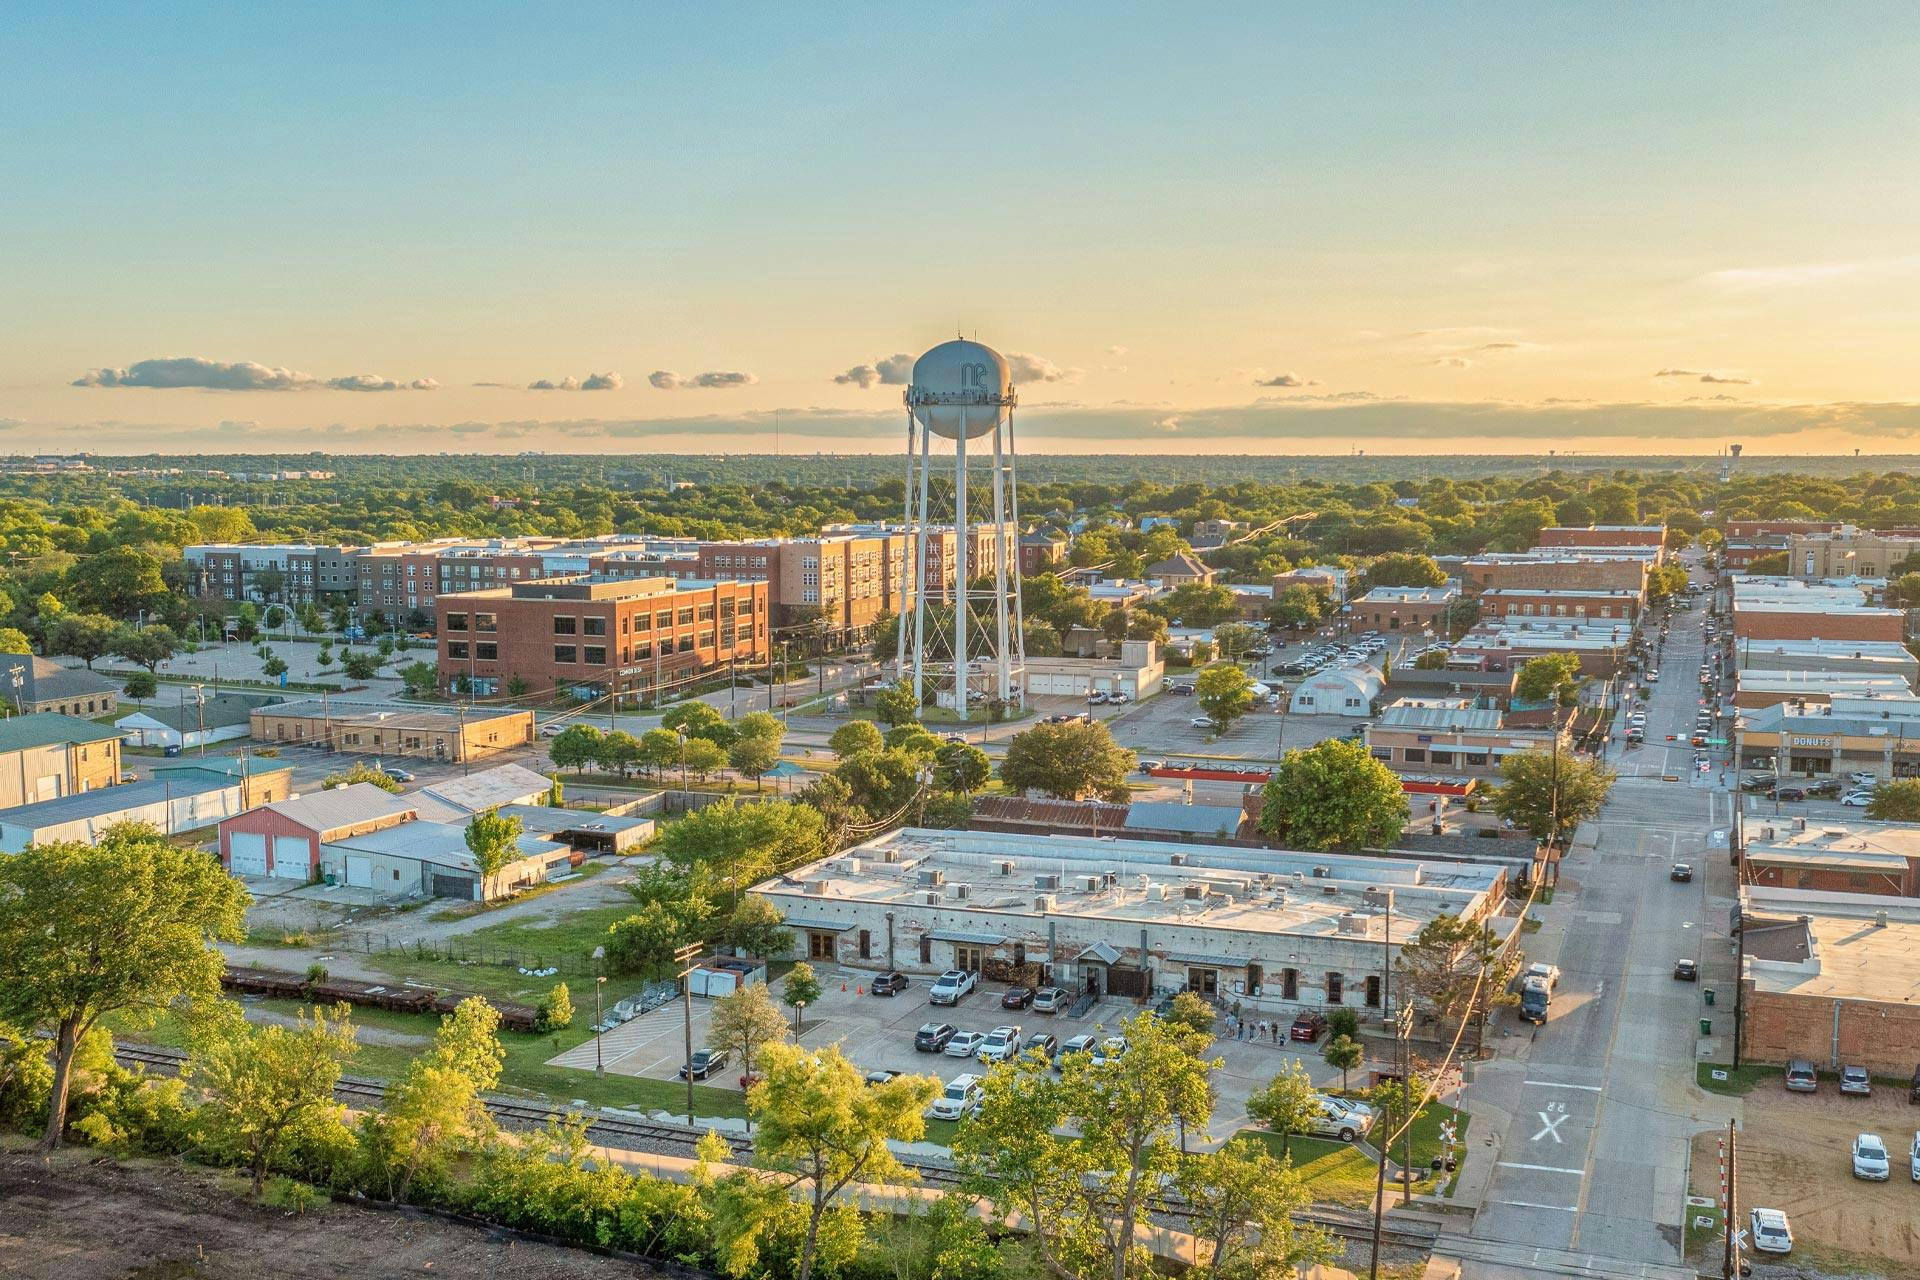 From a farming community to Texas' 9th largest city: Plano has come a long  way